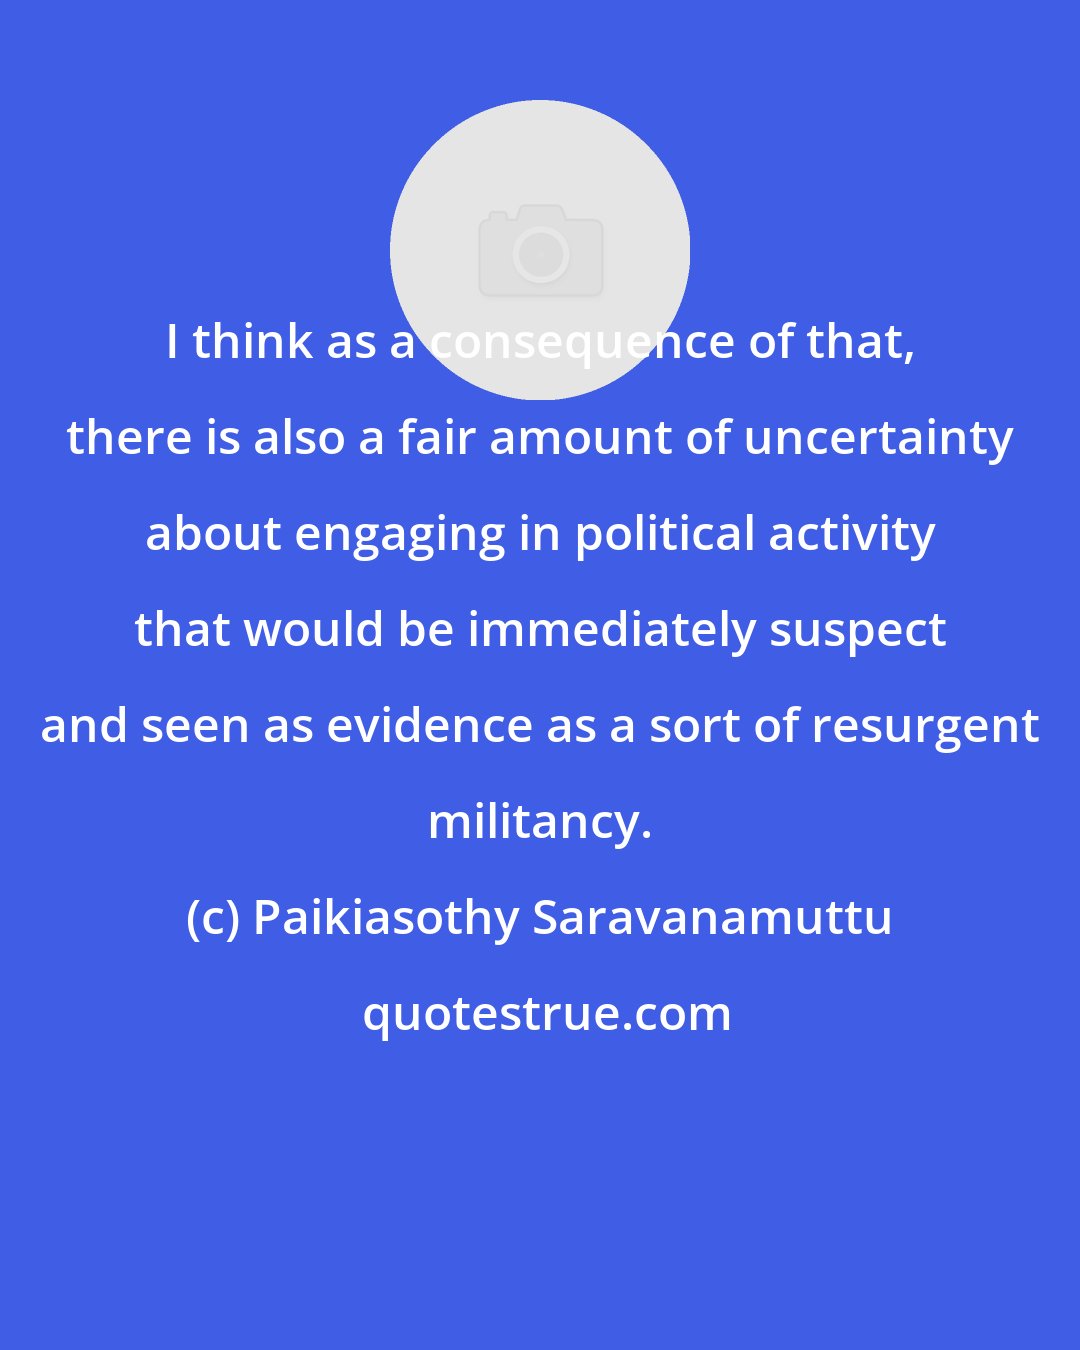 Paikiasothy Saravanamuttu: I think as a consequence of that, there is also a fair amount of uncertainty about engaging in political activity that would be immediately suspect and seen as evidence as a sort of resurgent militancy.